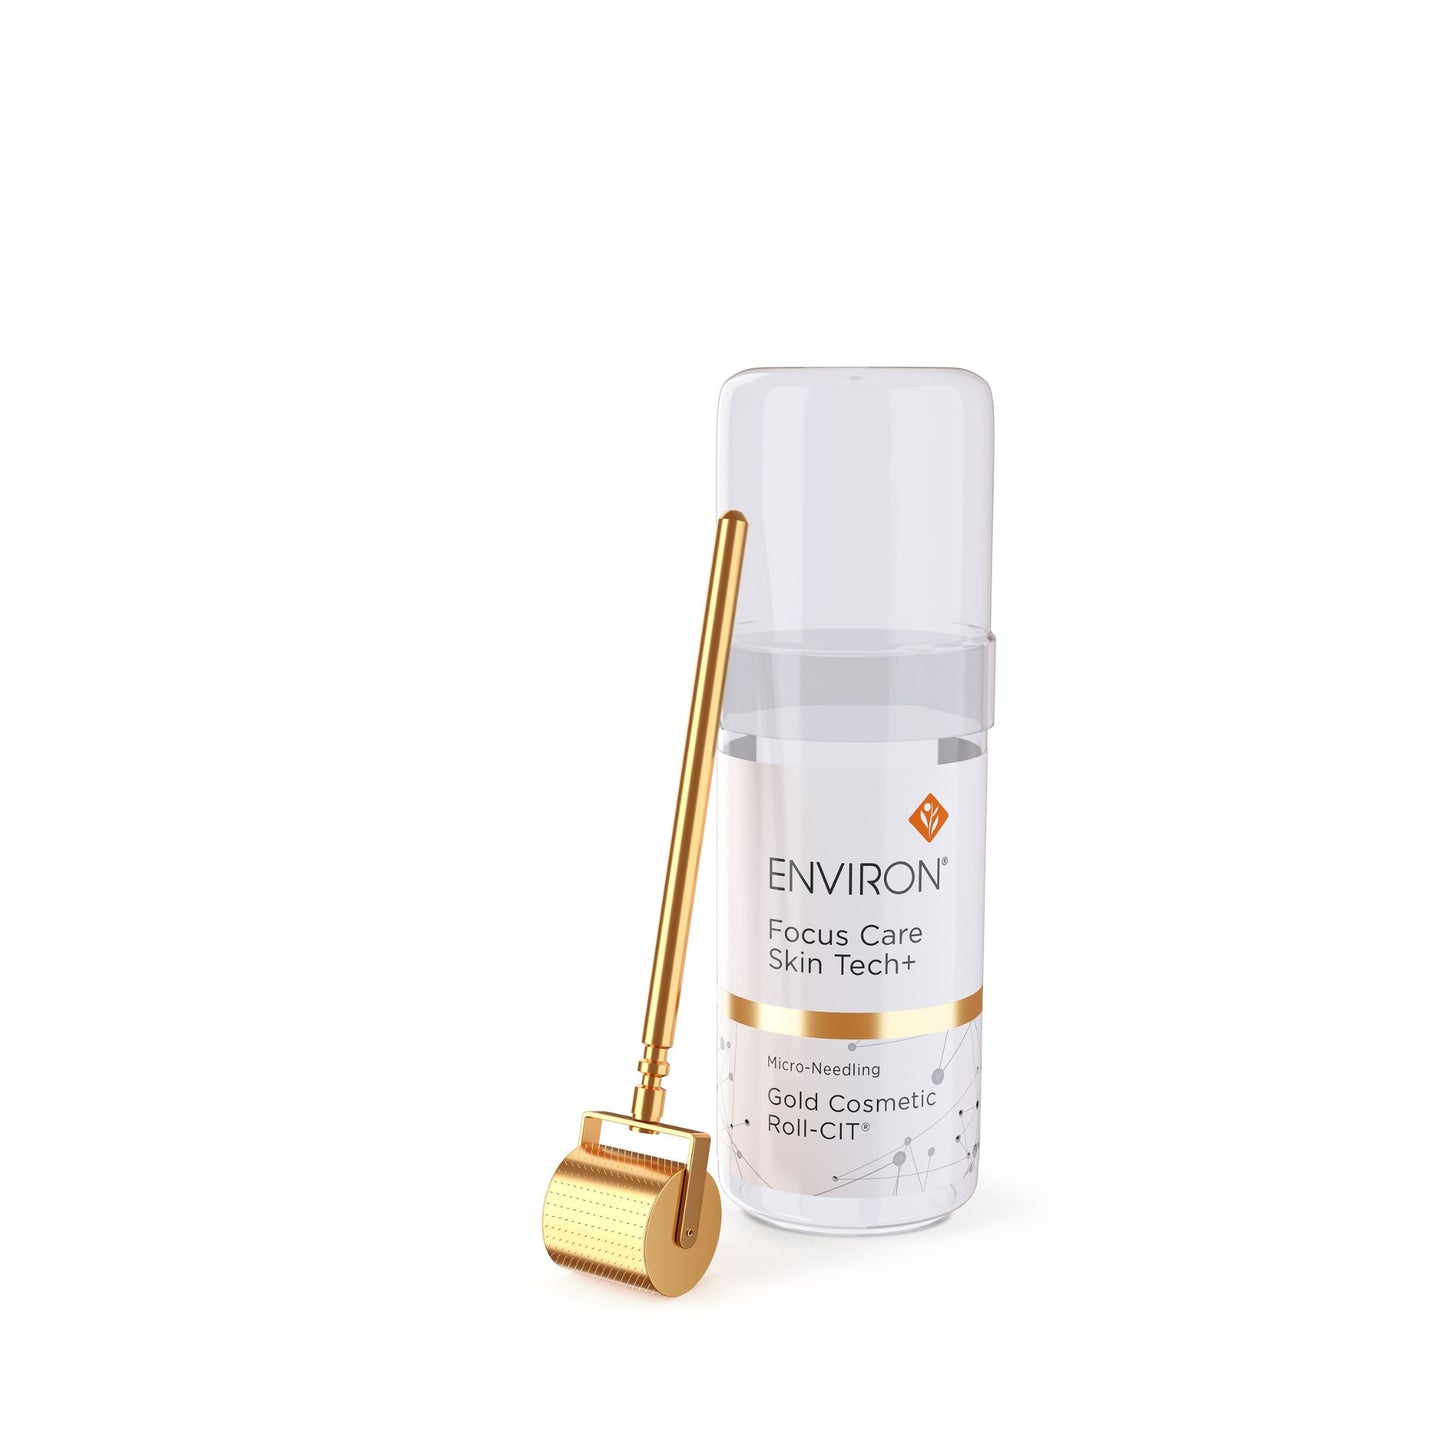 Gold Roll-CIT: At-Home Microneedling Roller